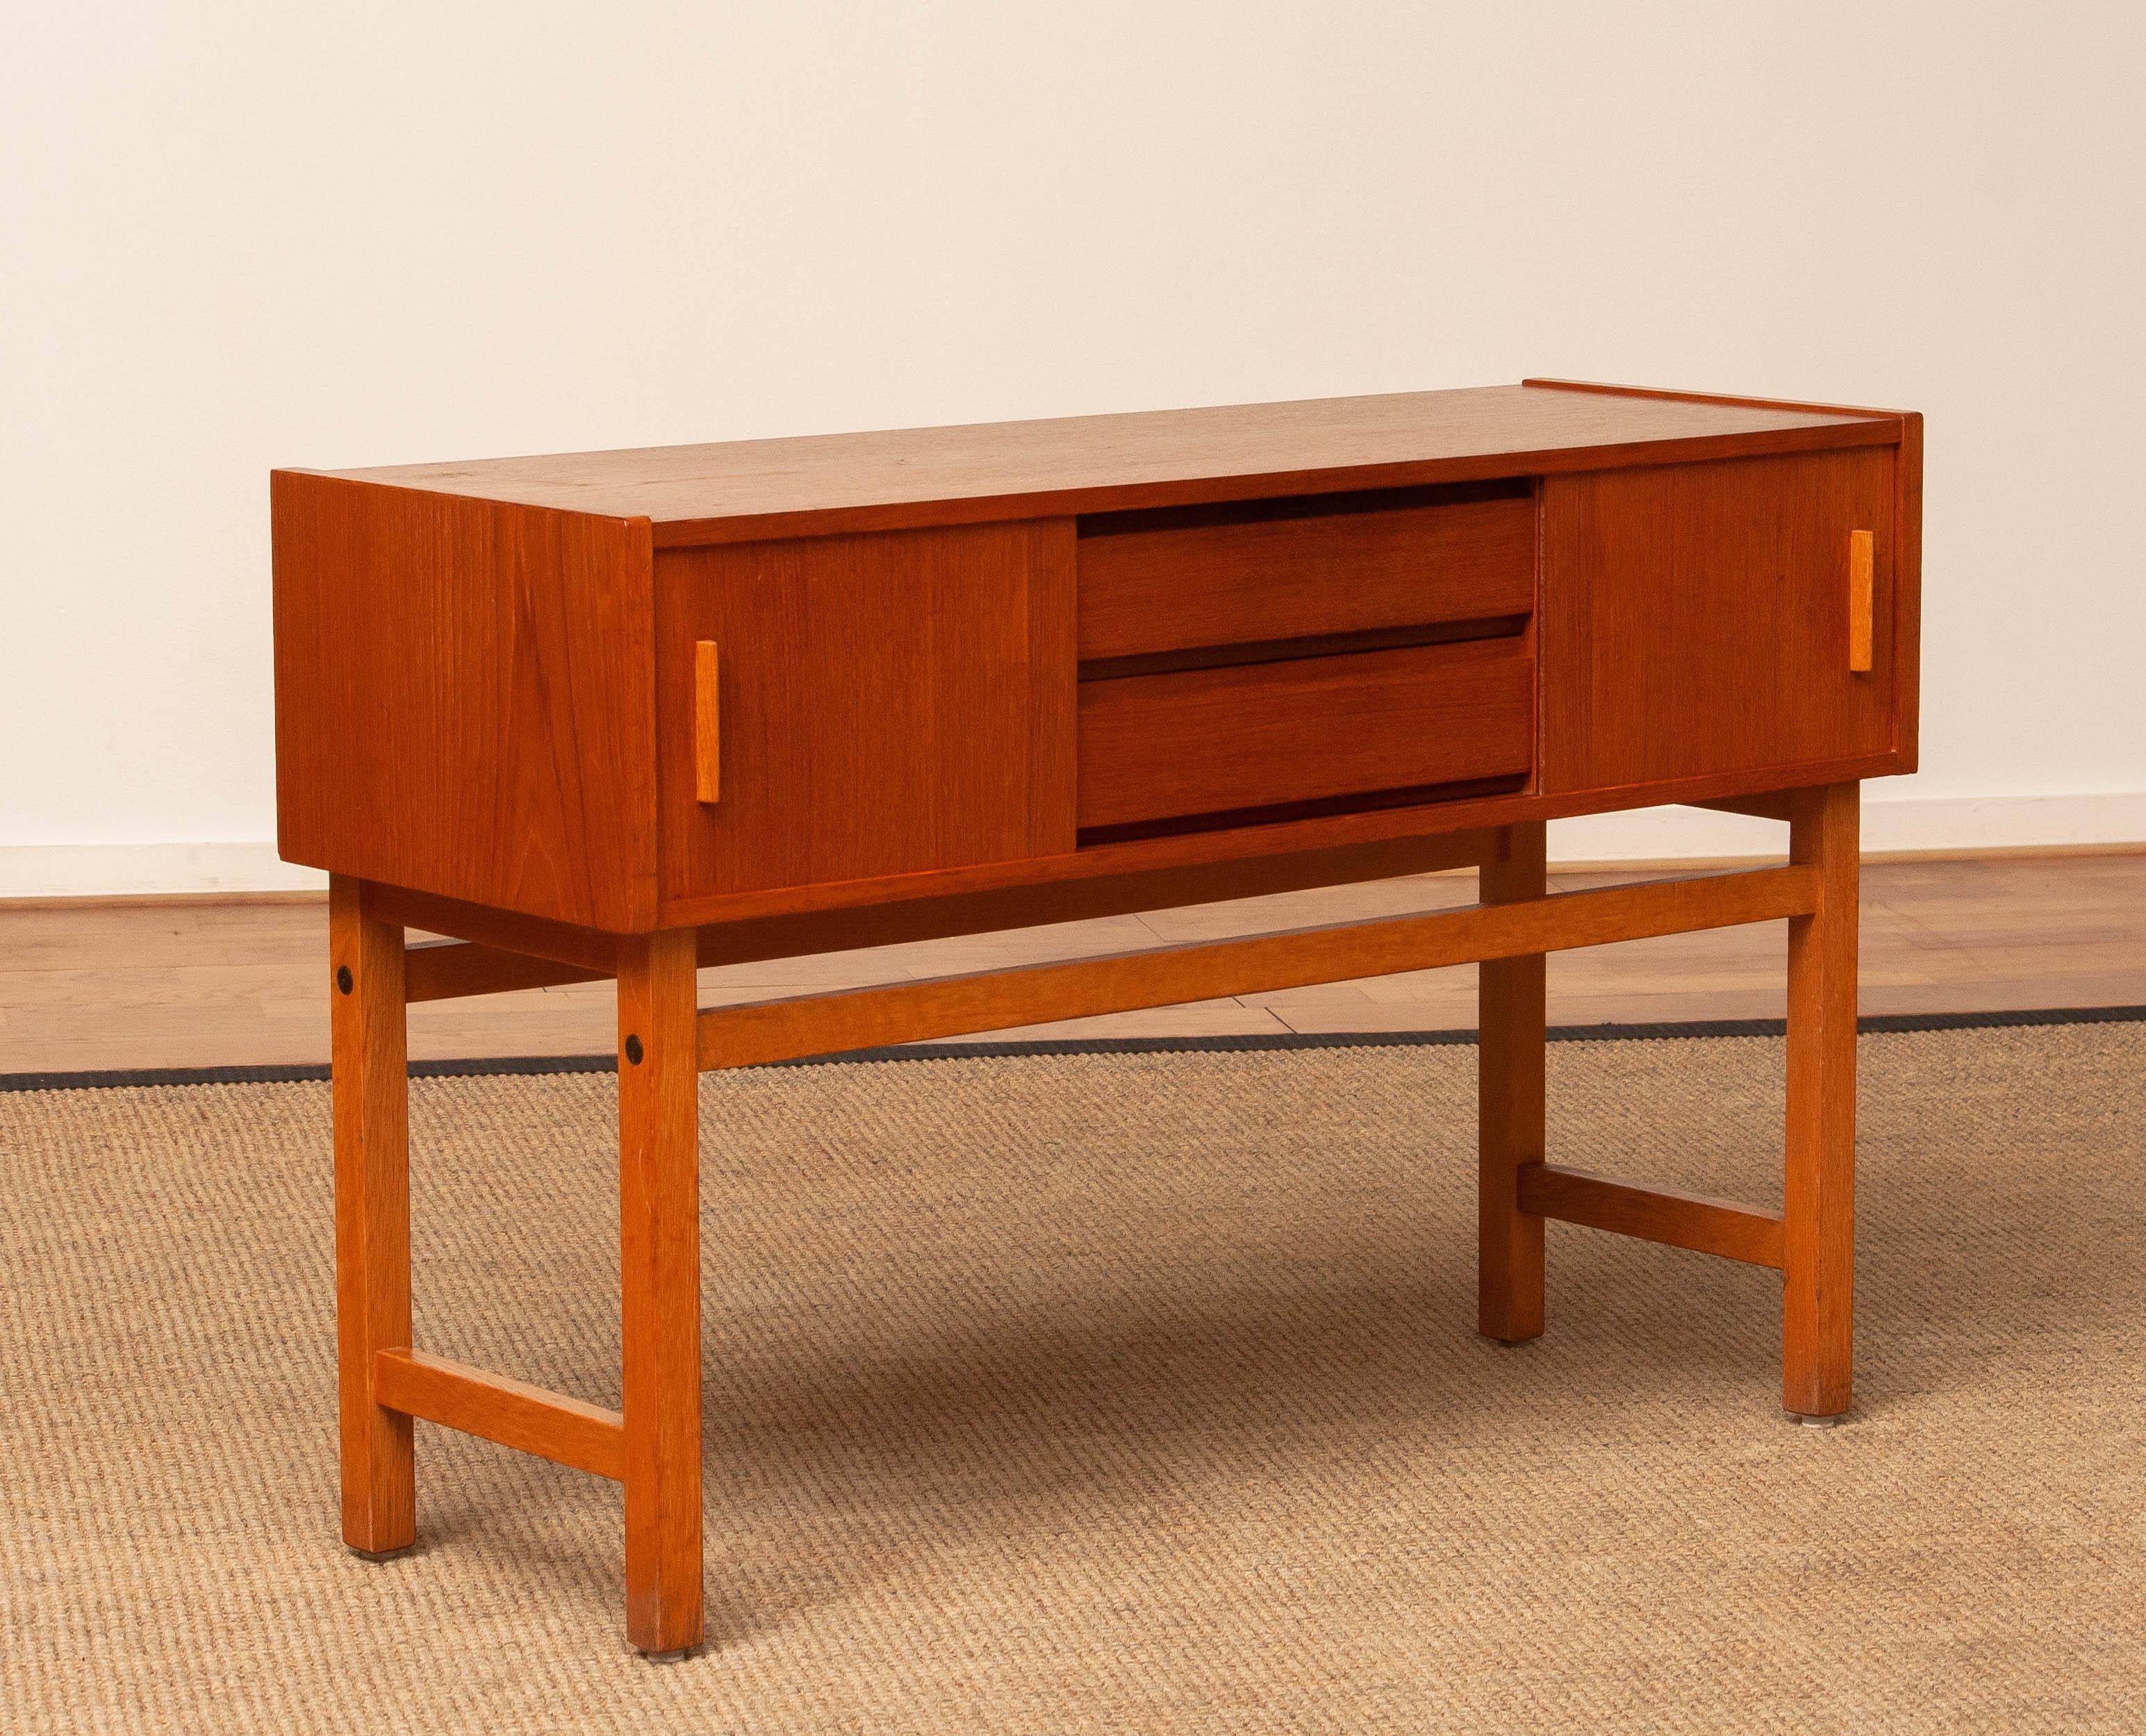 Swedish 1960s Teak Cabinet / Credenzas / Console With Drawers And Sliding Doors. Sweden. For Sale